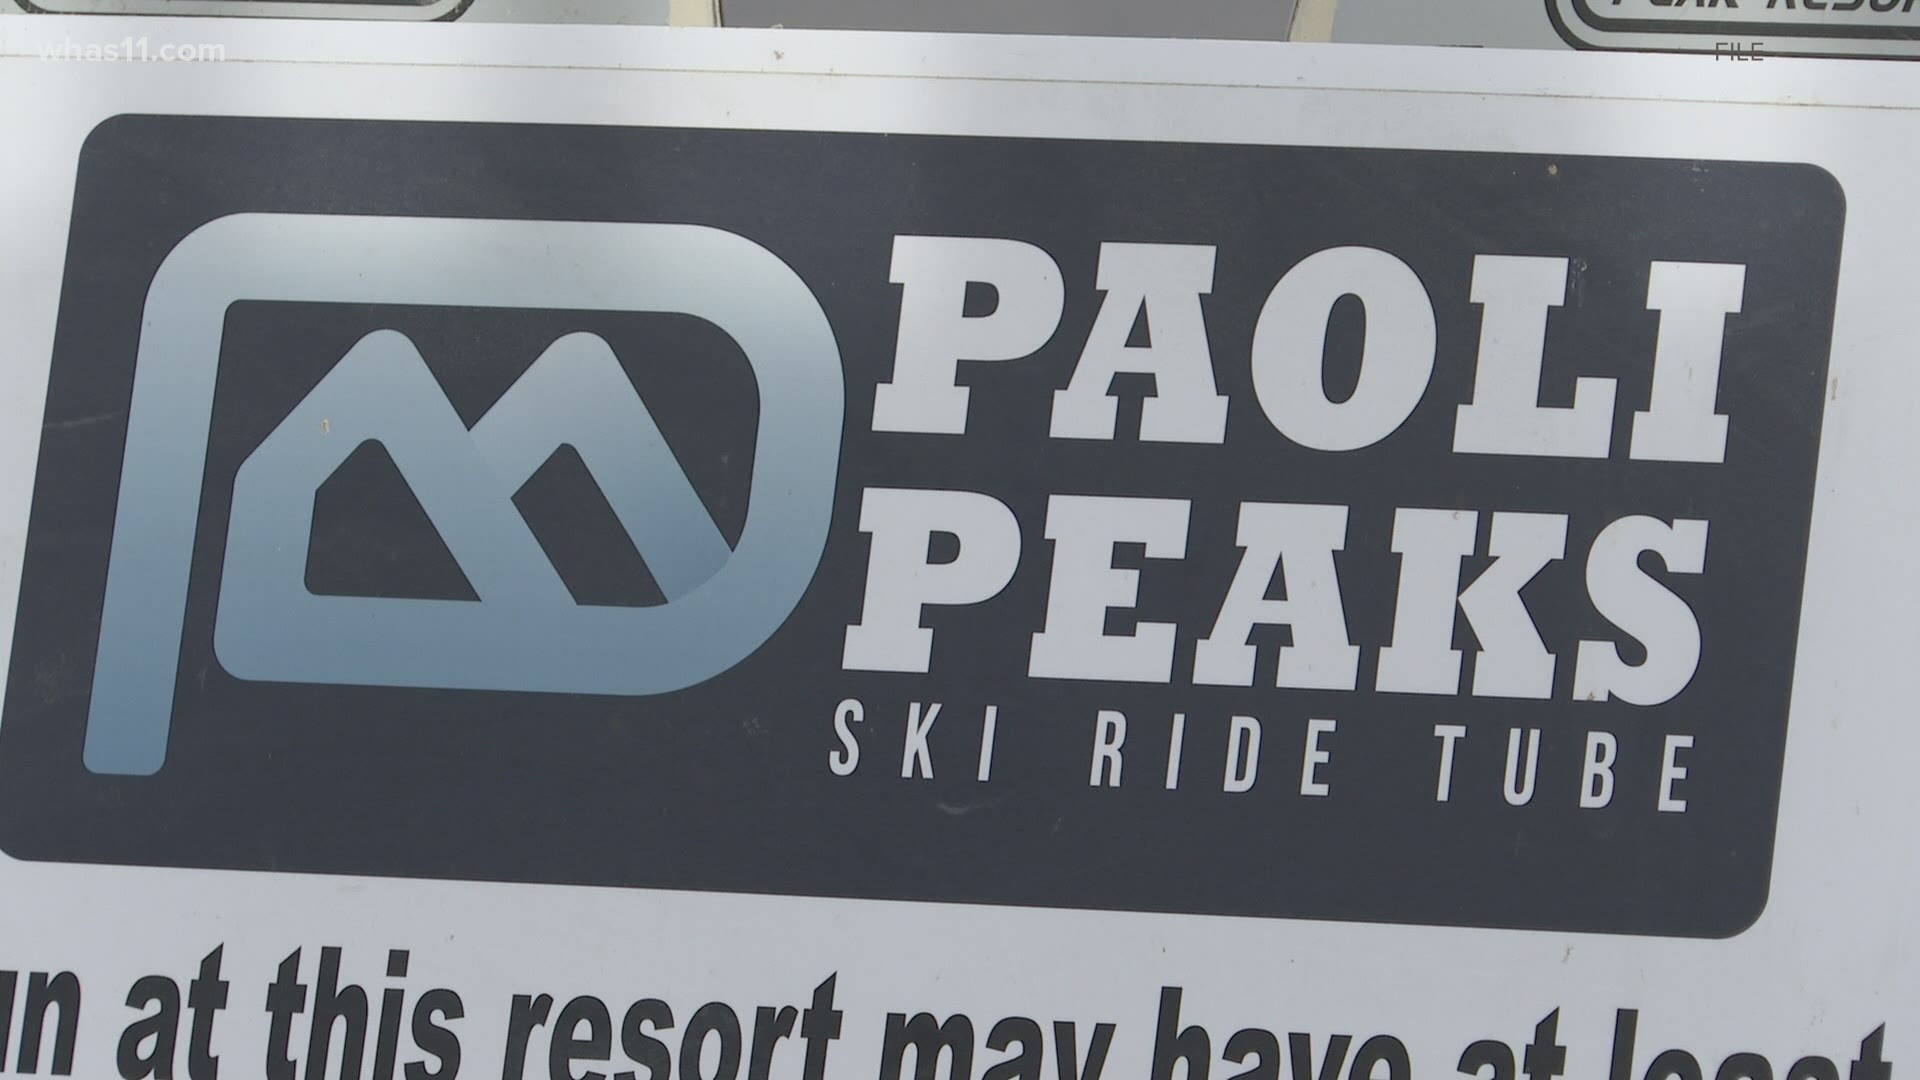 There has been snow on the ground at Paoli Peaks for a while but this week we got our first big snow and that's making for a big weekend at the ski resort.